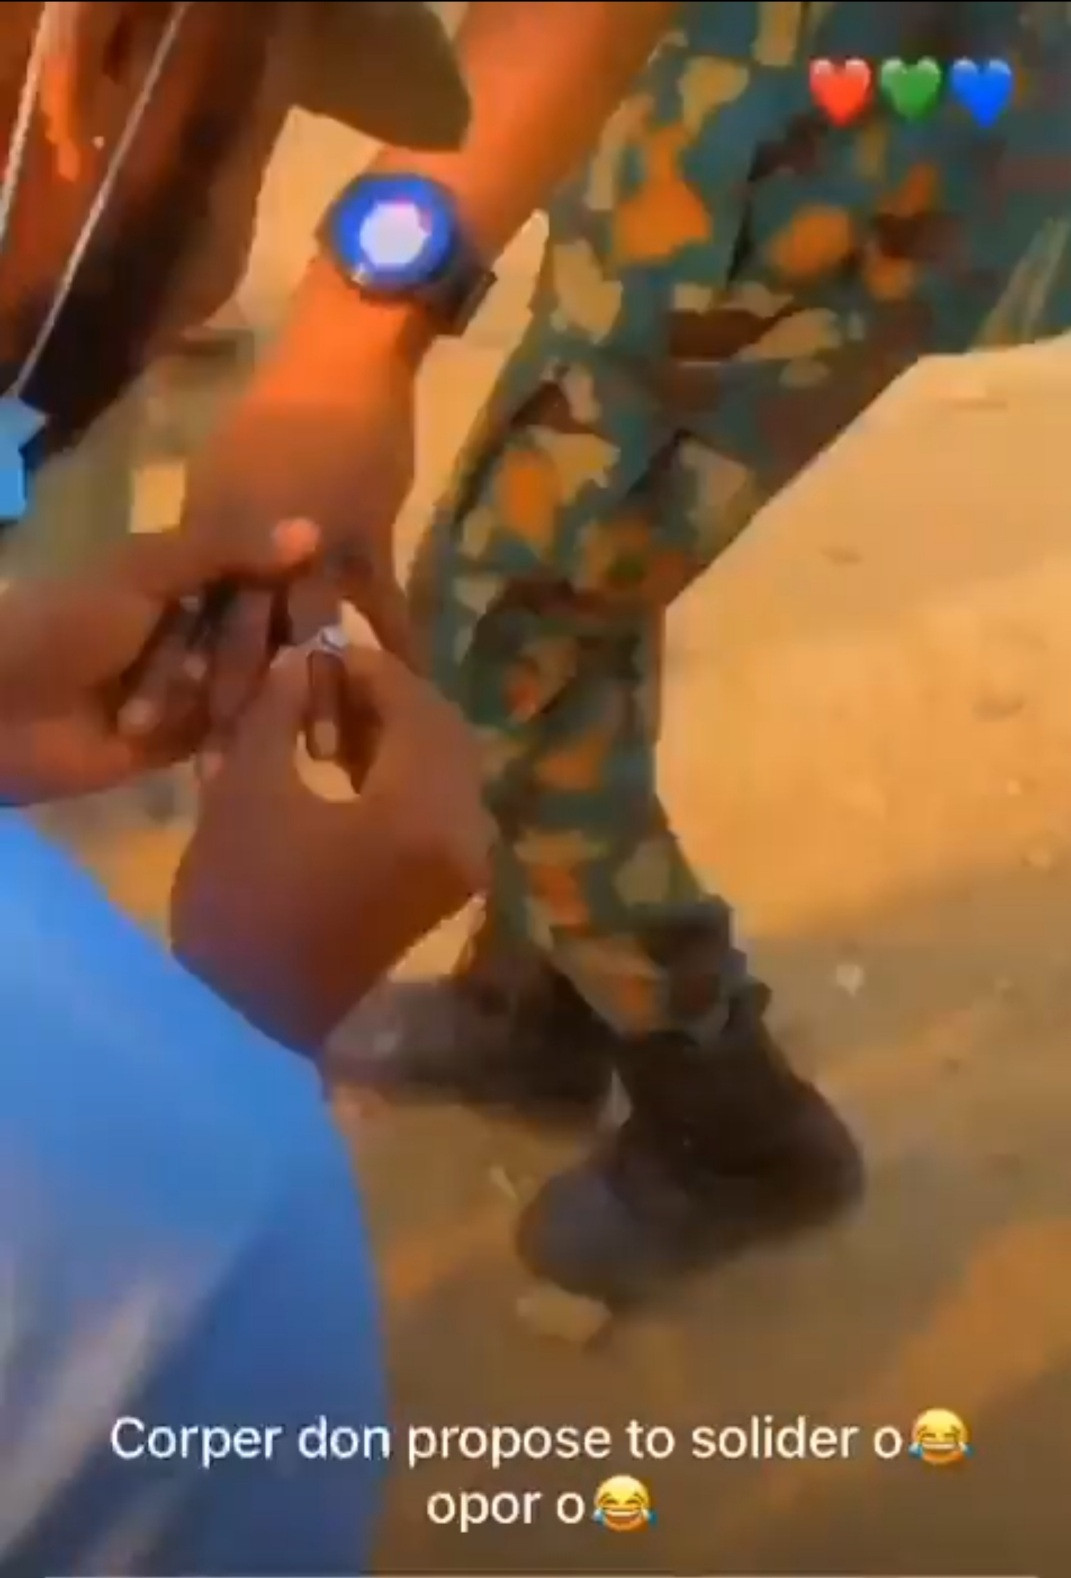 Male corps member proposes to female soldier in Kwara State orientation camp (video)